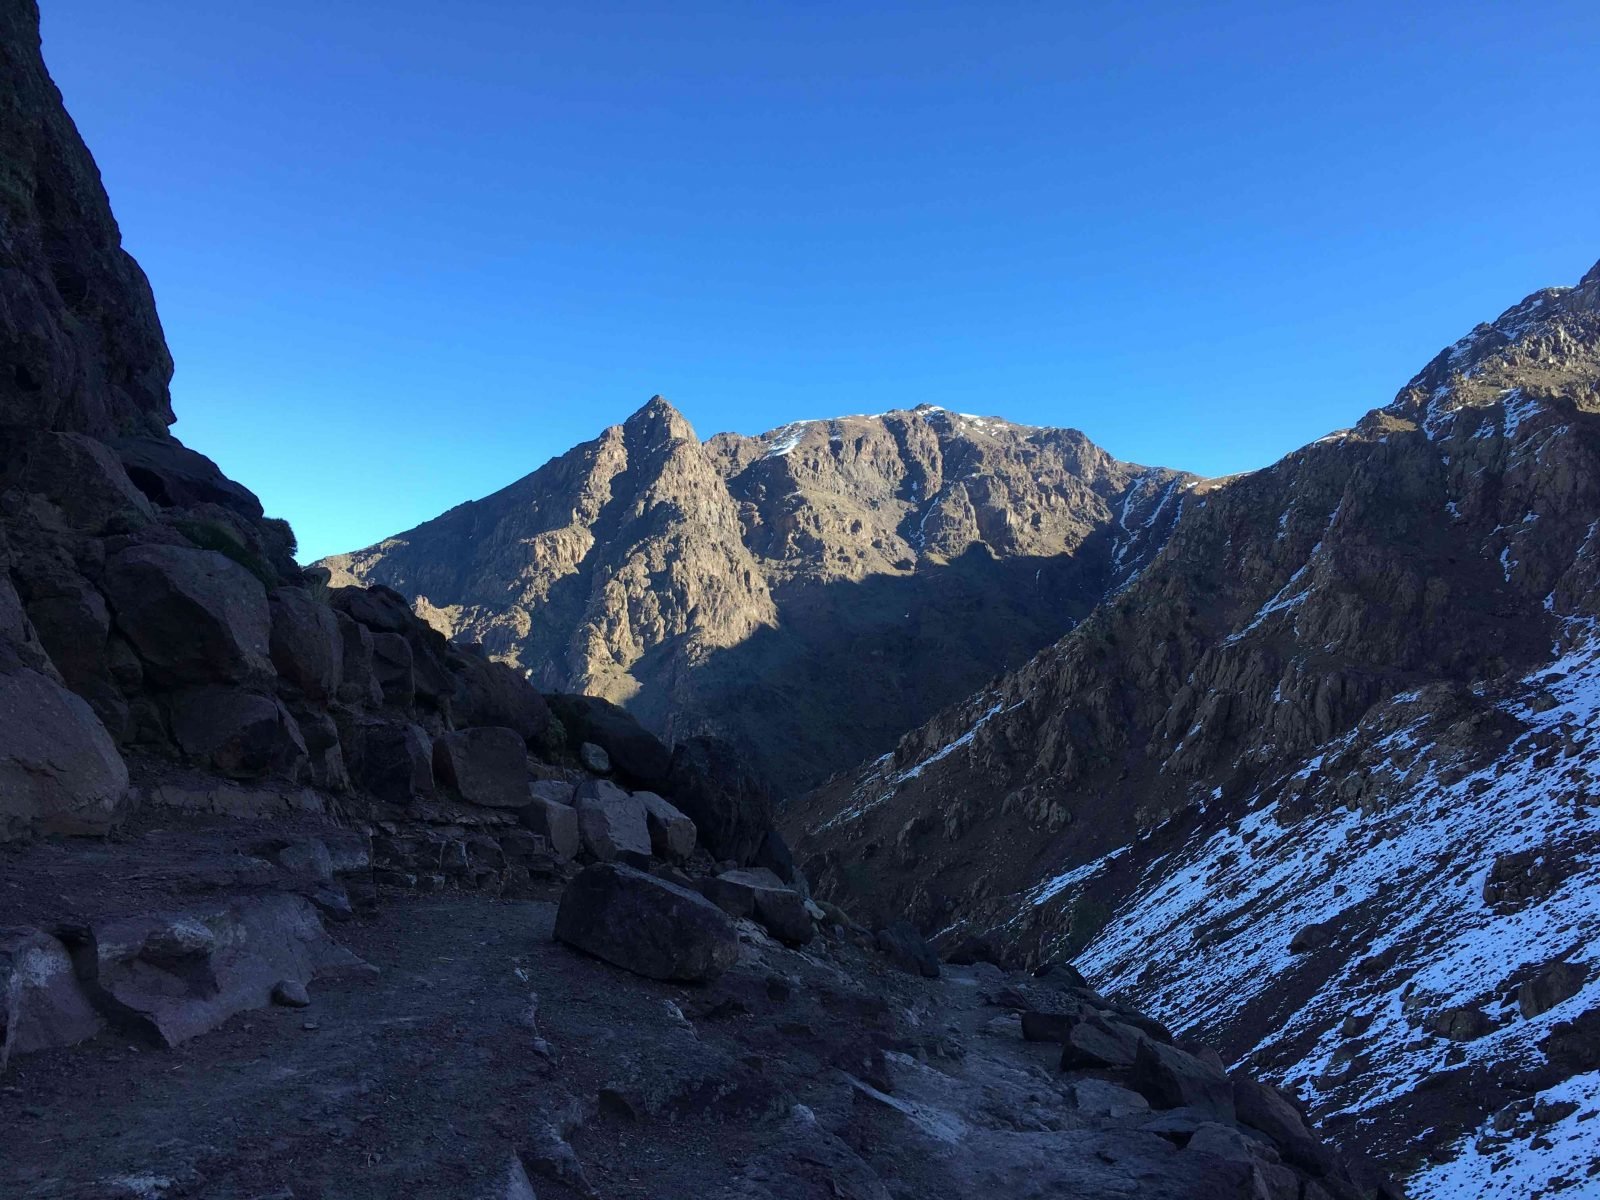 The summit of Mount Toubkal in the early morning.